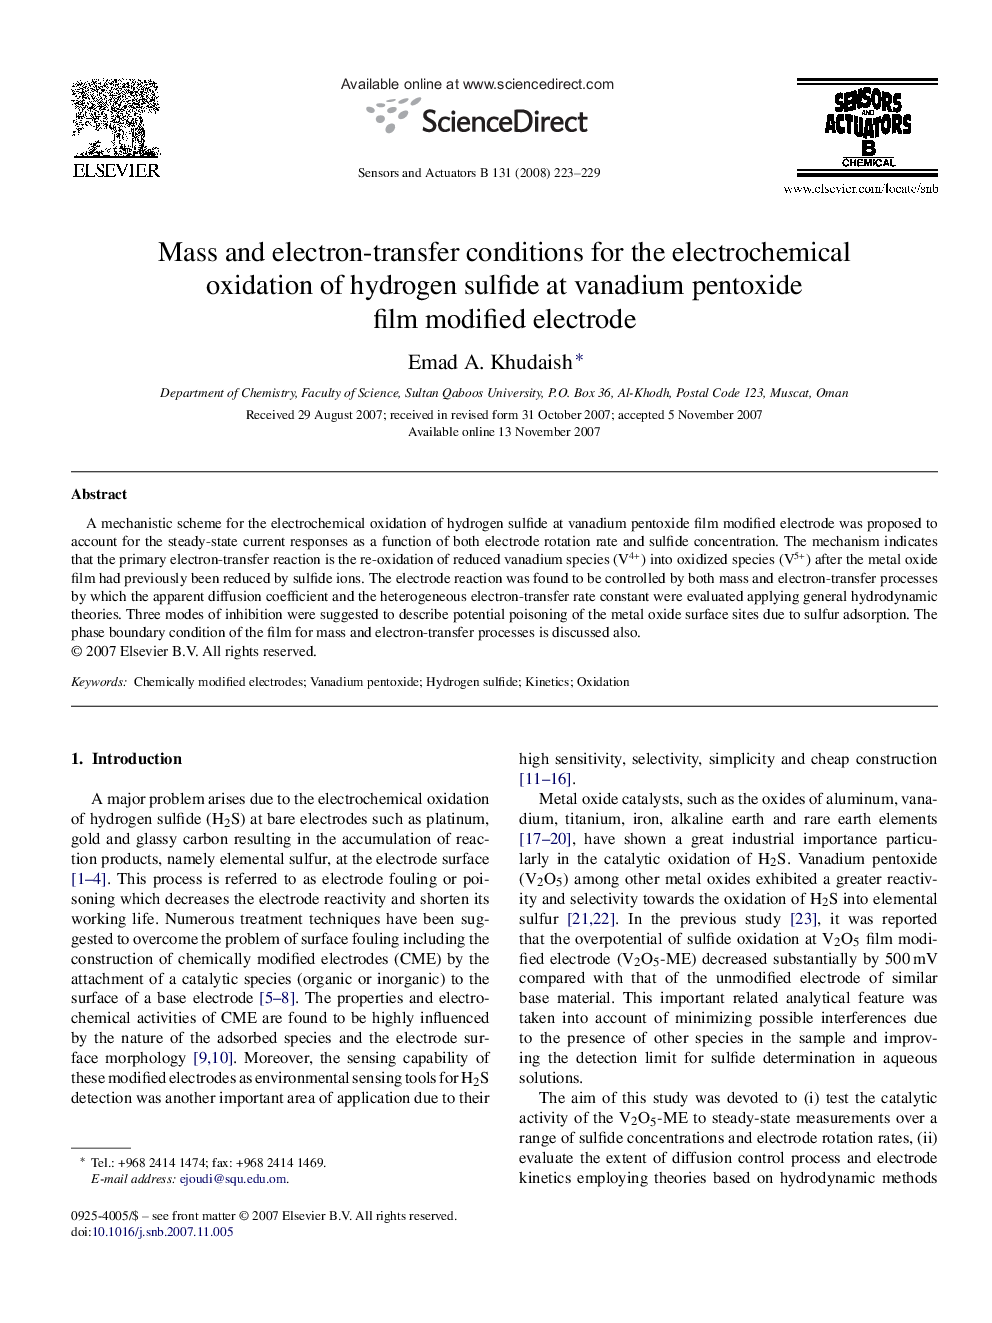 Mass and electron-transfer conditions for the electrochemical oxidation of hydrogen sulfide at vanadium pentoxide film modified electrode